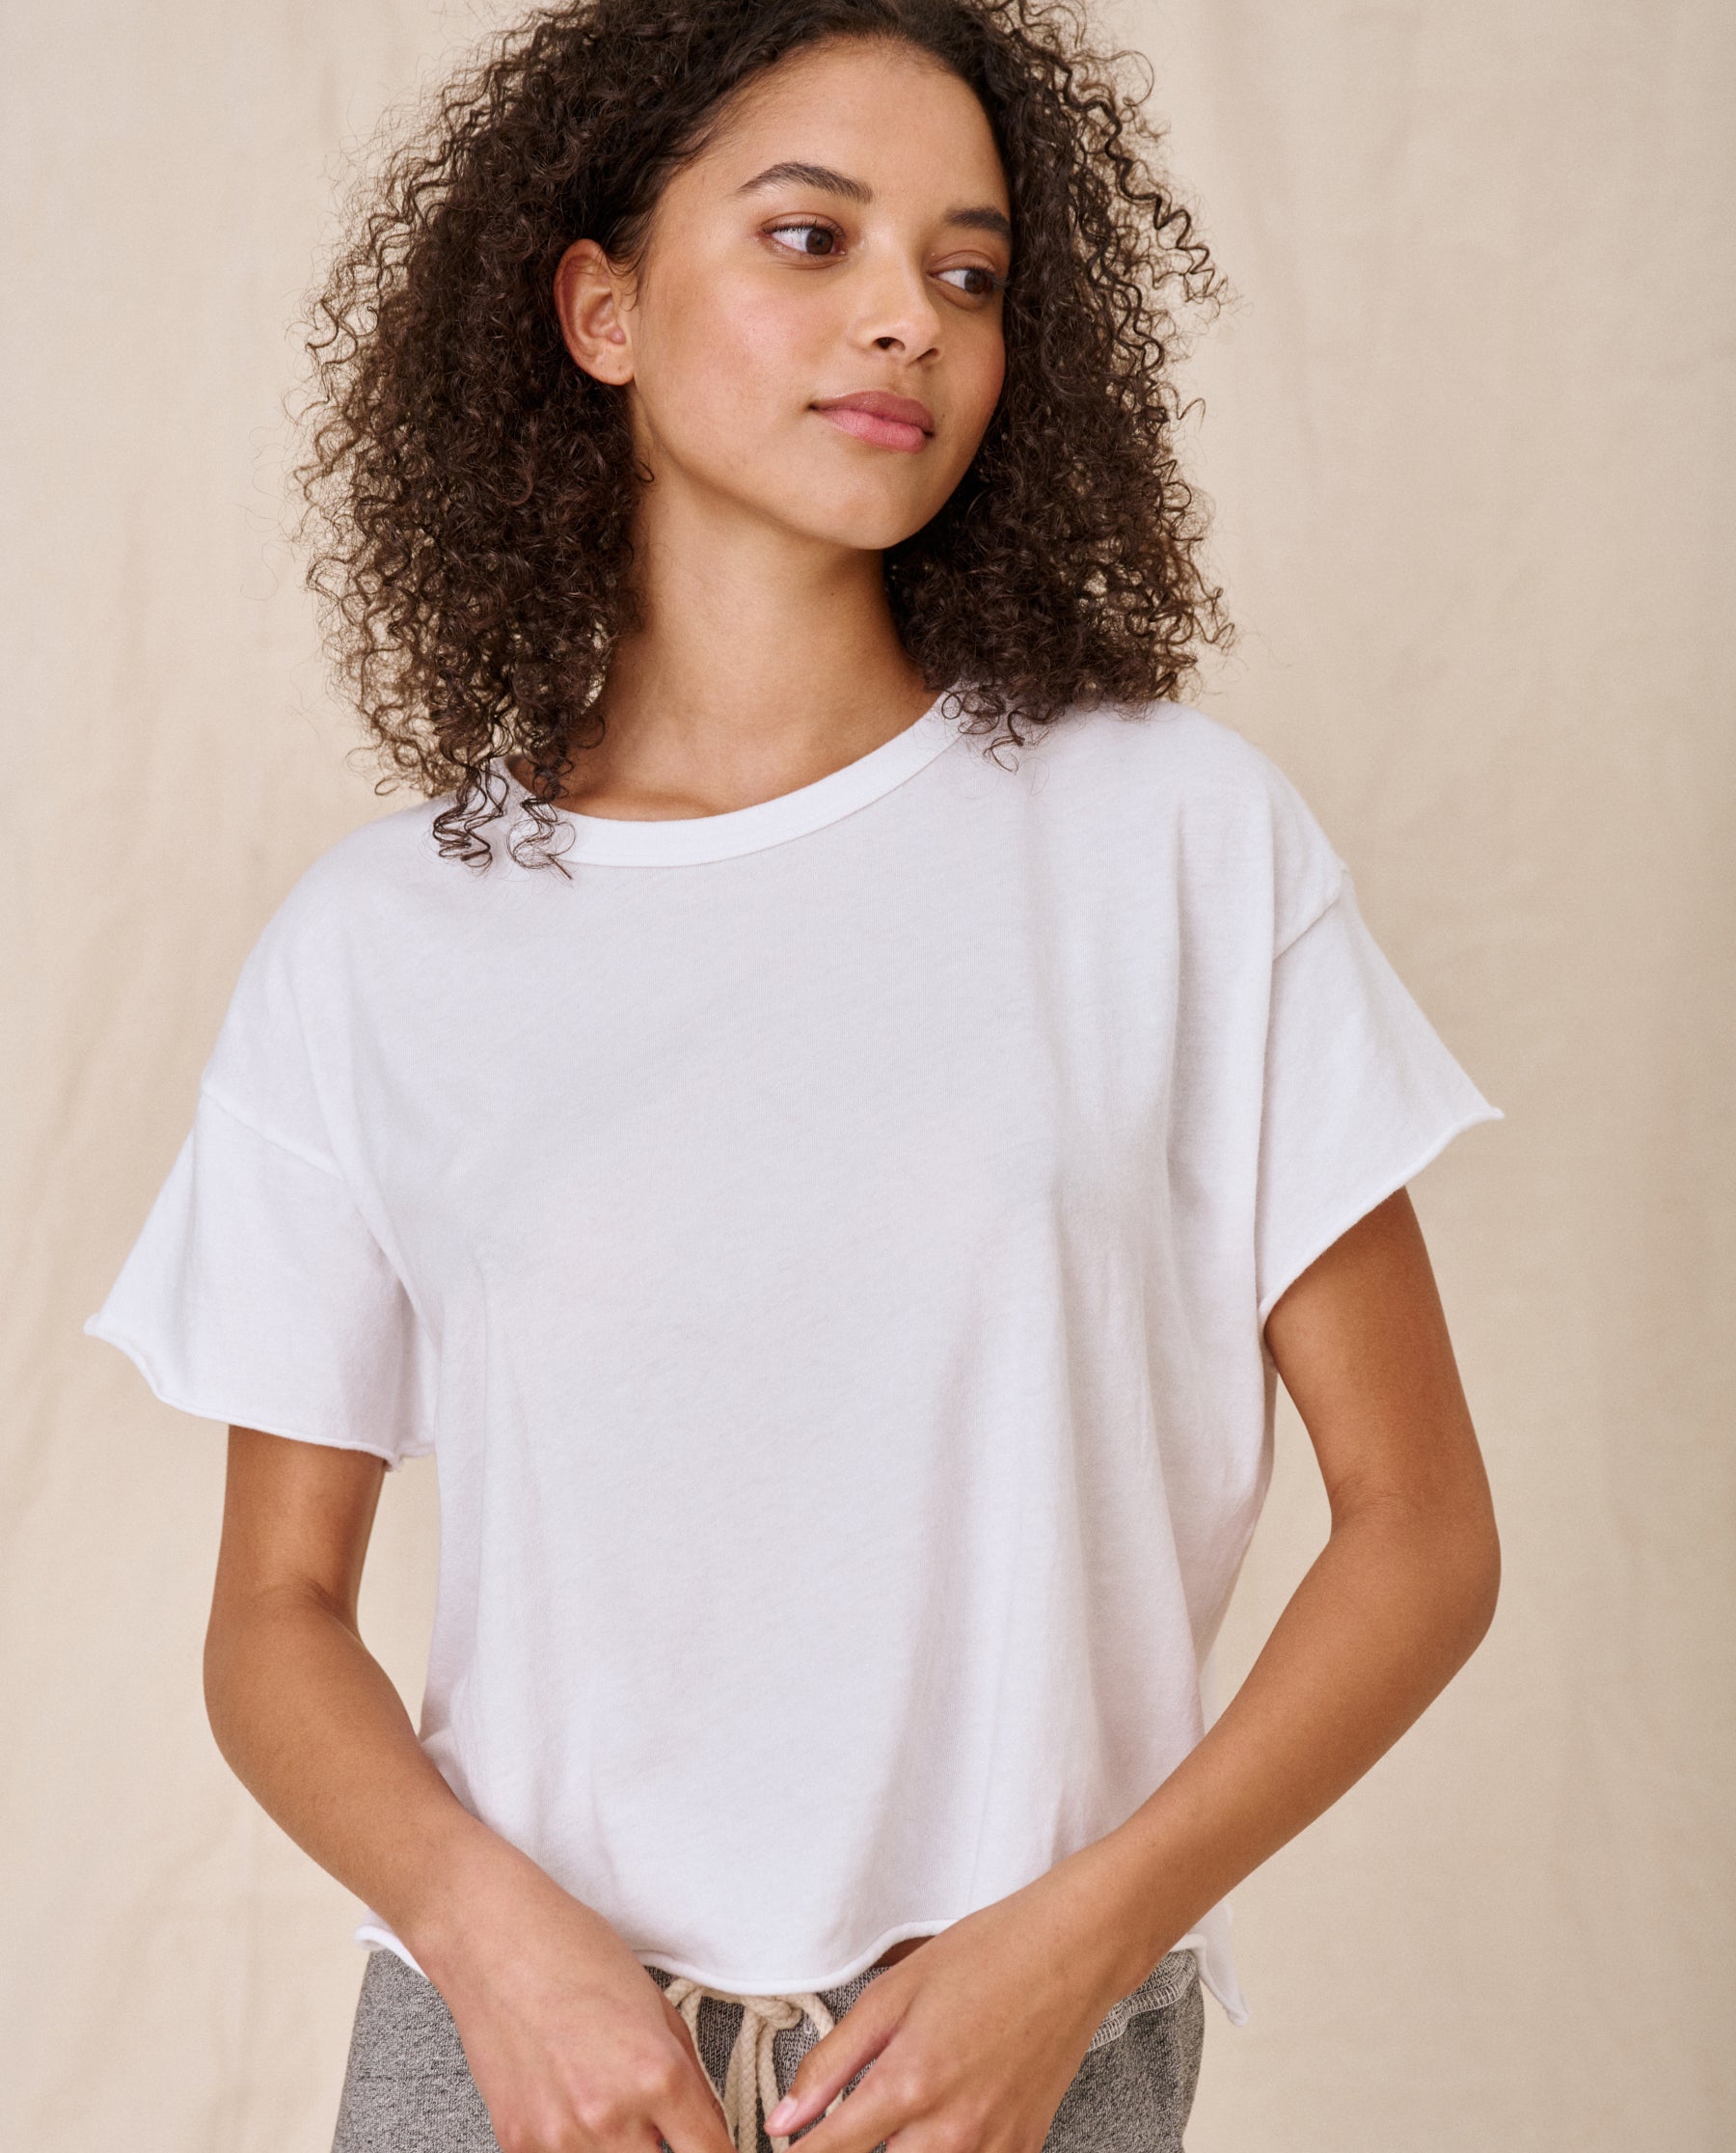 The Crop Tee. Solid -- TRUE WHITE TEES THE GREAT. CORE KNITS